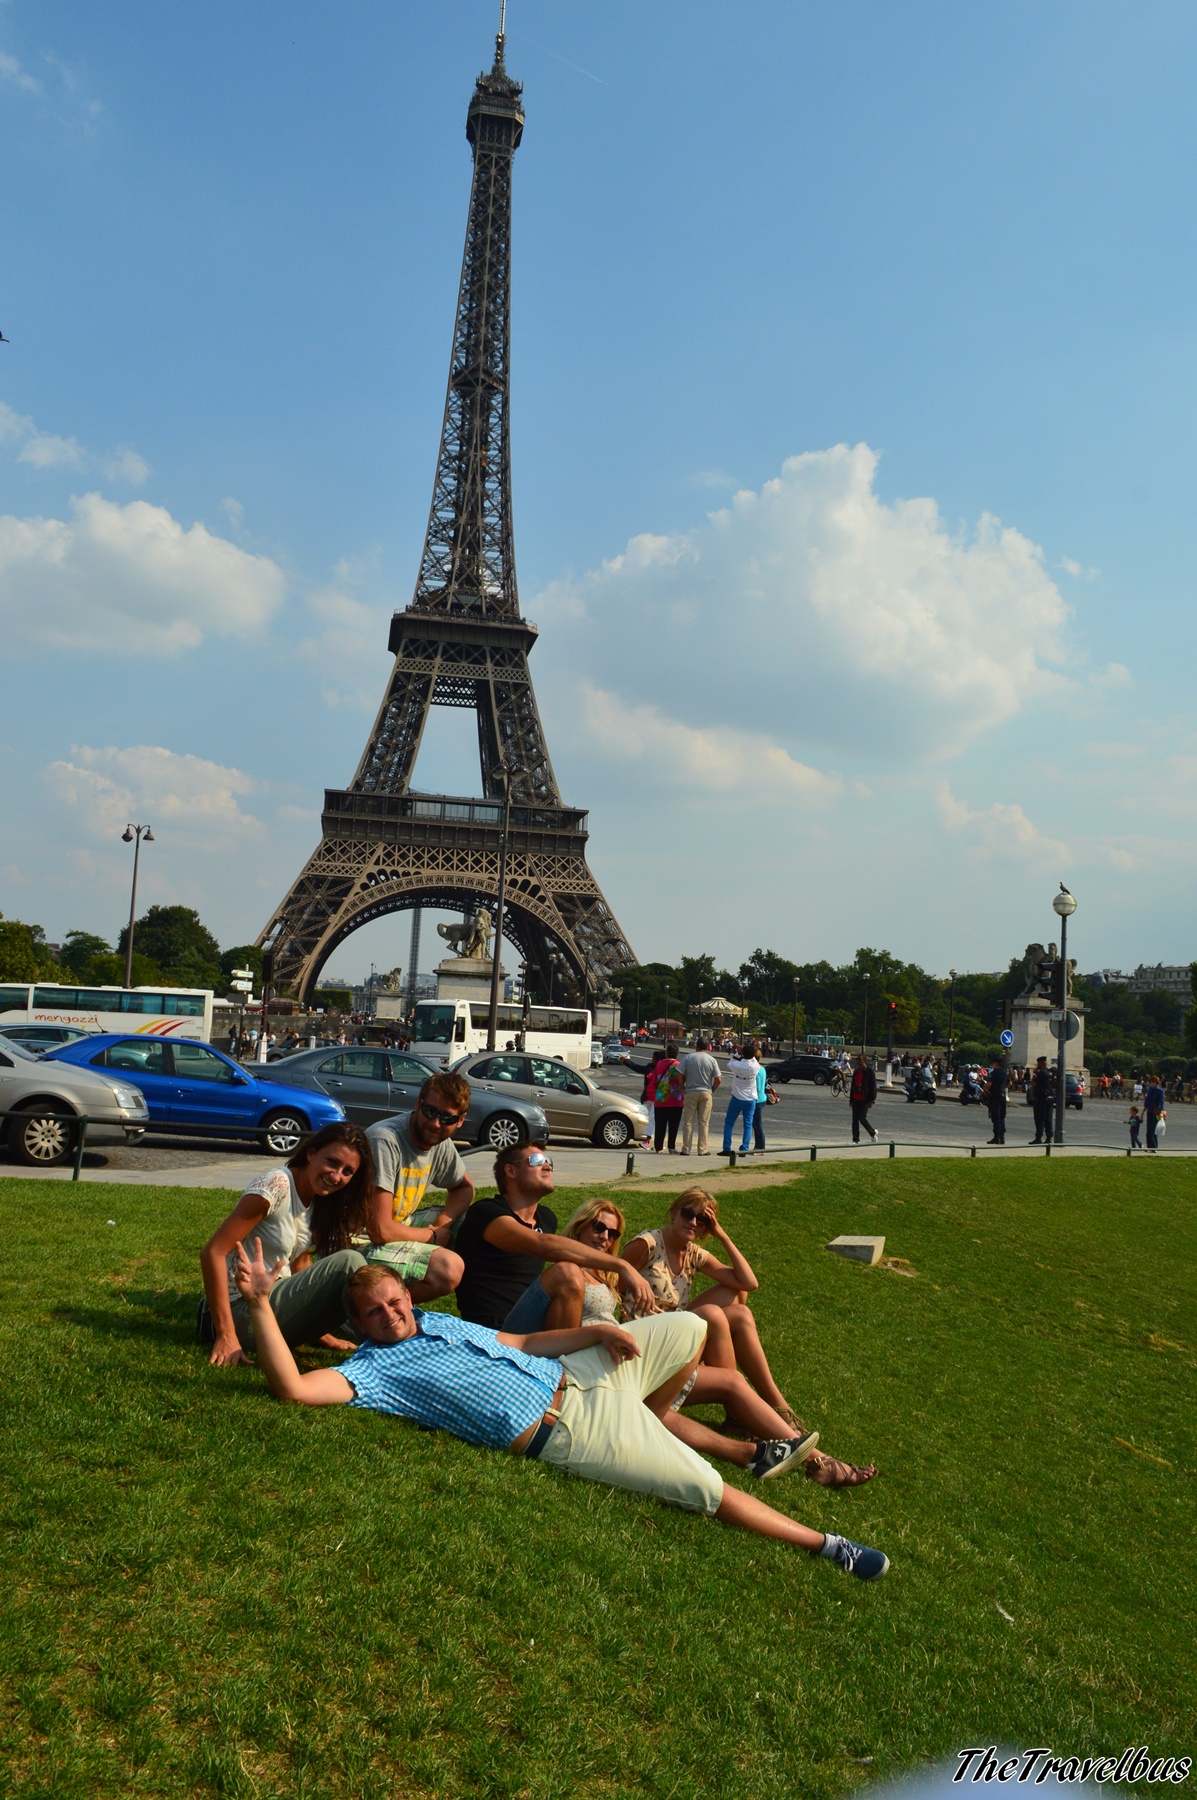 And the Eiffel Tower again, this time during the day